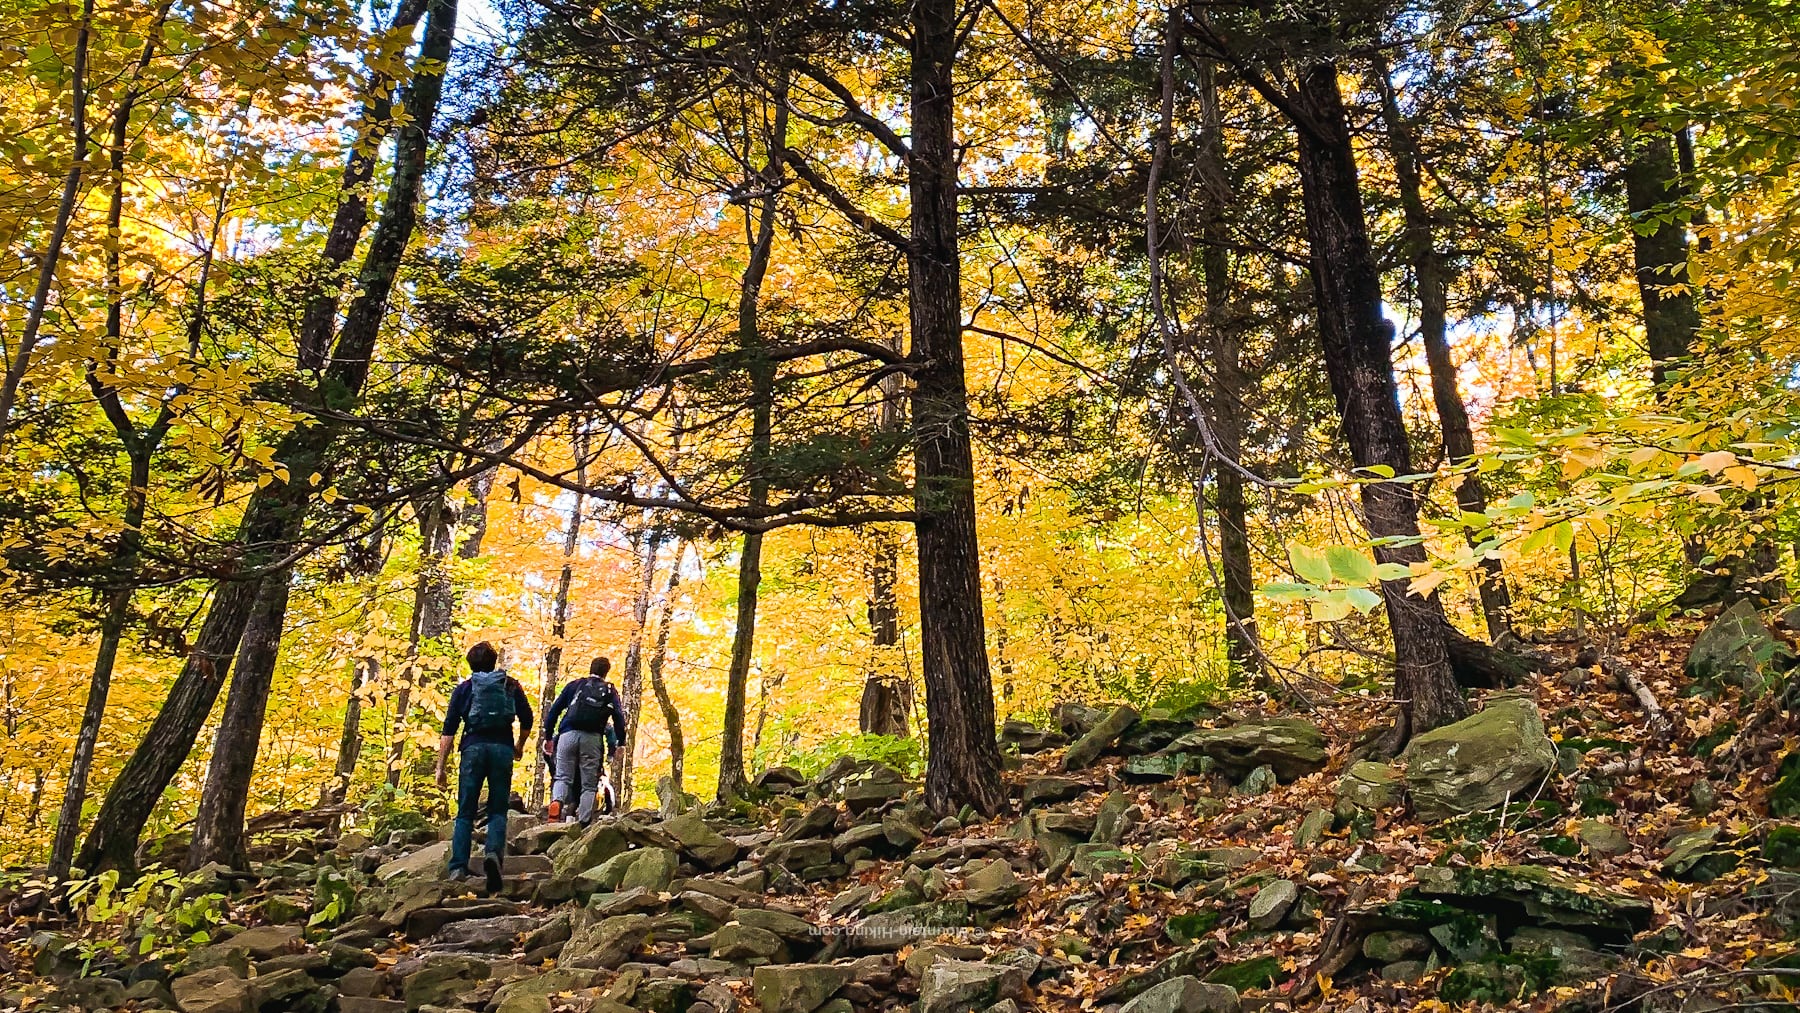 hikers climbing rugged trail in autumnal scene